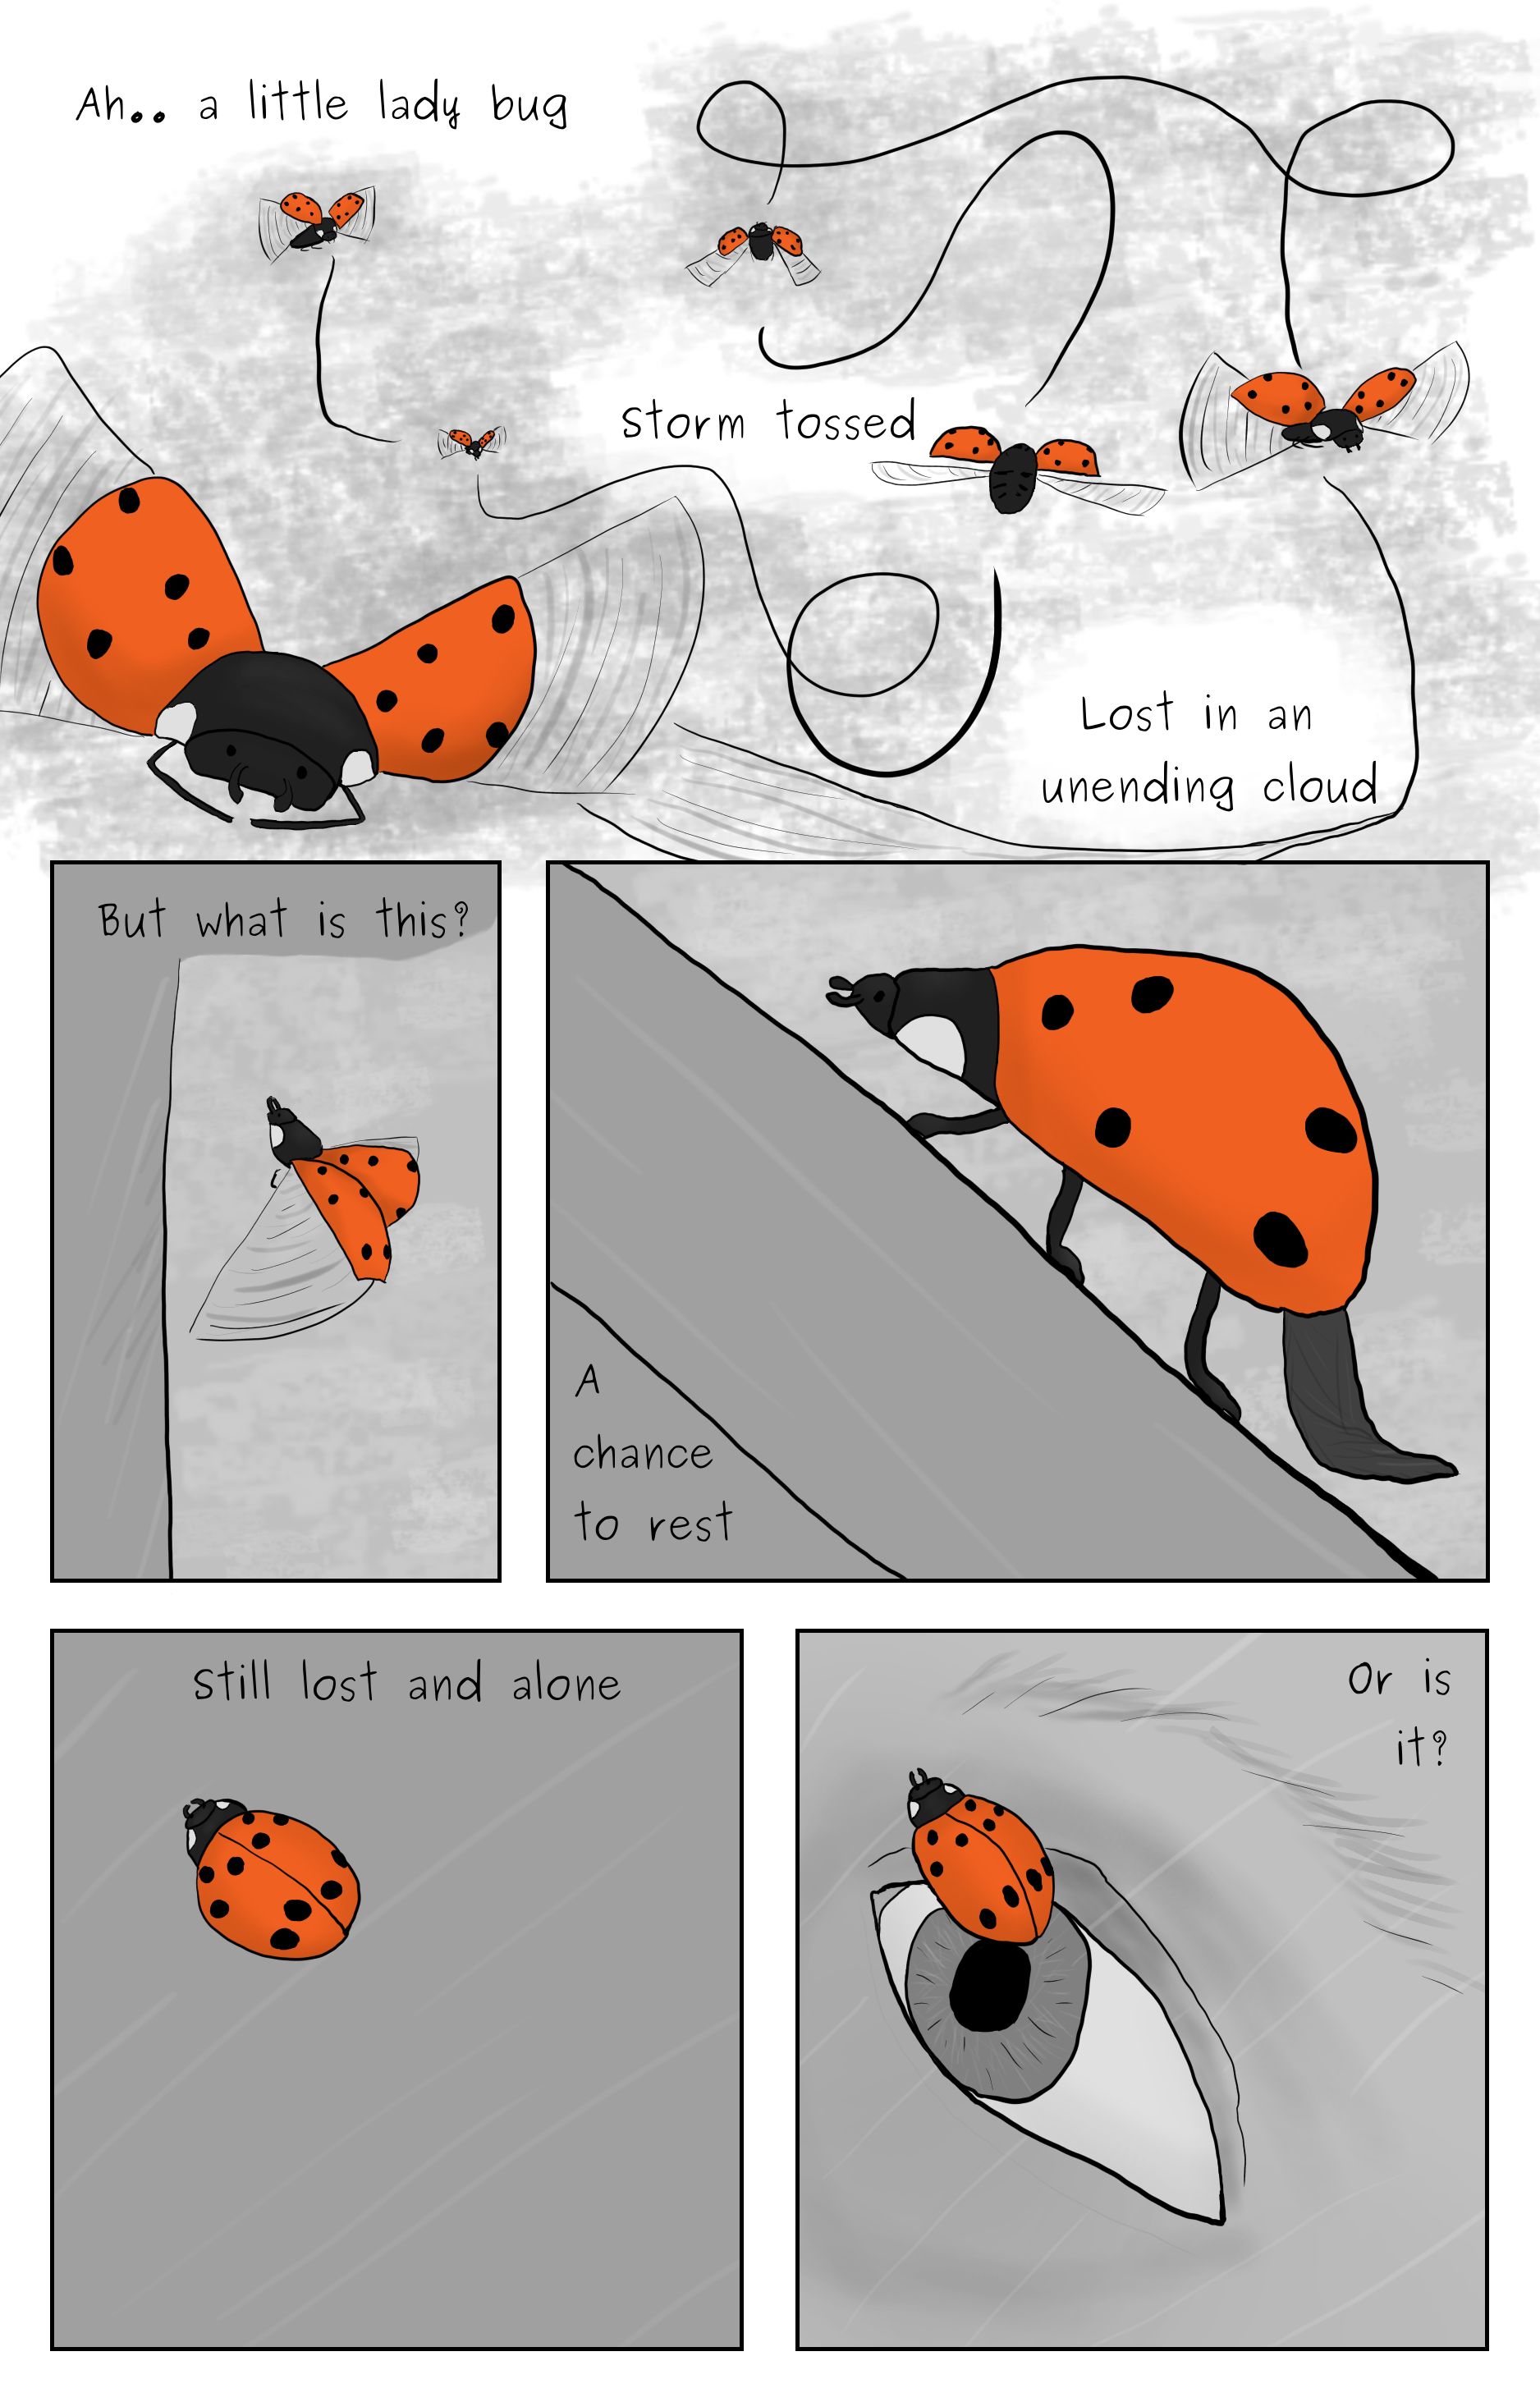 A comic featuring  A ladybug being lost in a stormcloud, finding a place to rest on a window, and an eye looking at ladybug from the other side of the window.